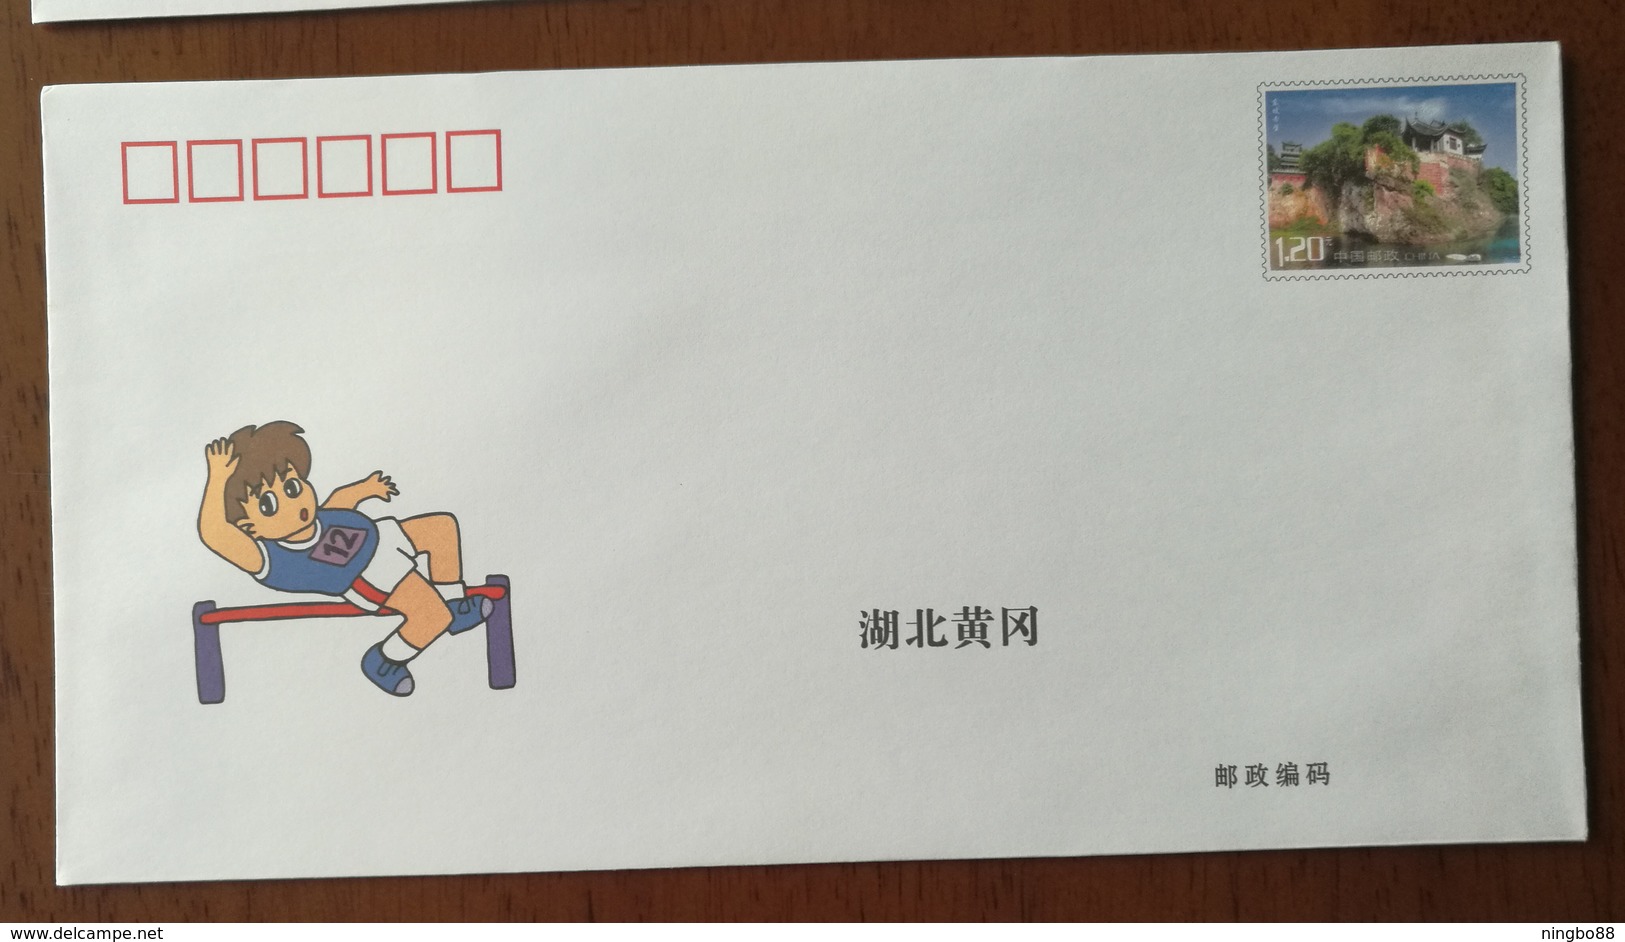 Men's High Jump,China 2007 Huangshi City The 2th Sports Meeting Advertising Postal Stationery Envelope - Athletics